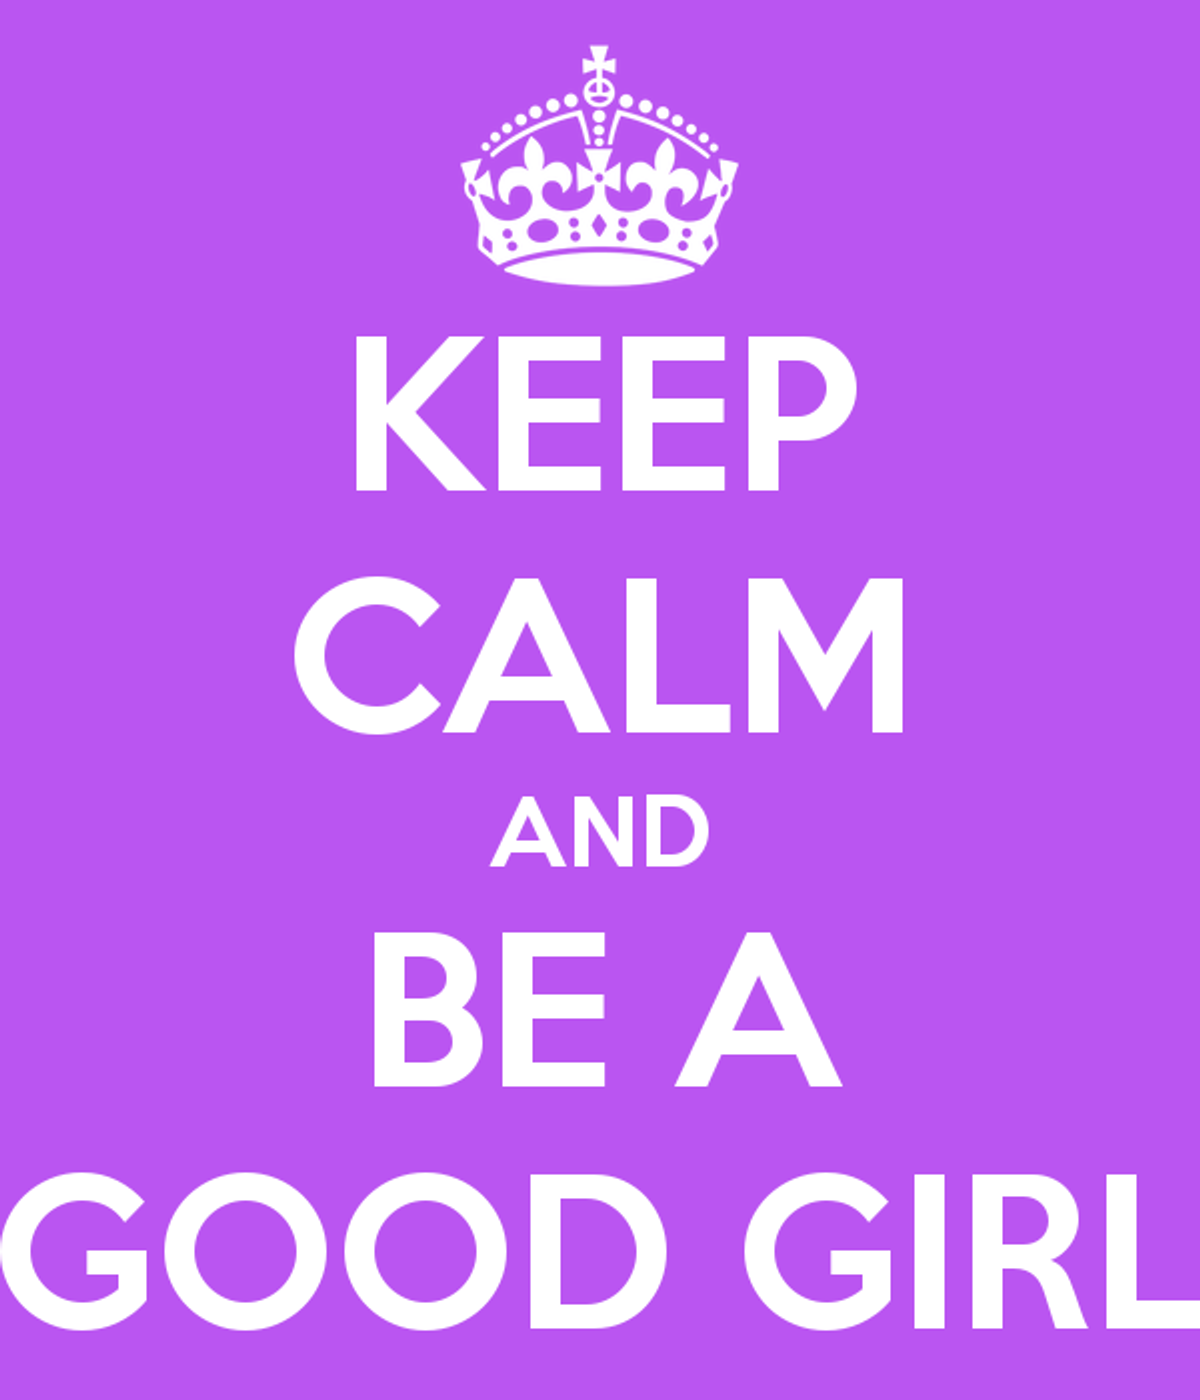 An Open Letter to The "Good Girl"